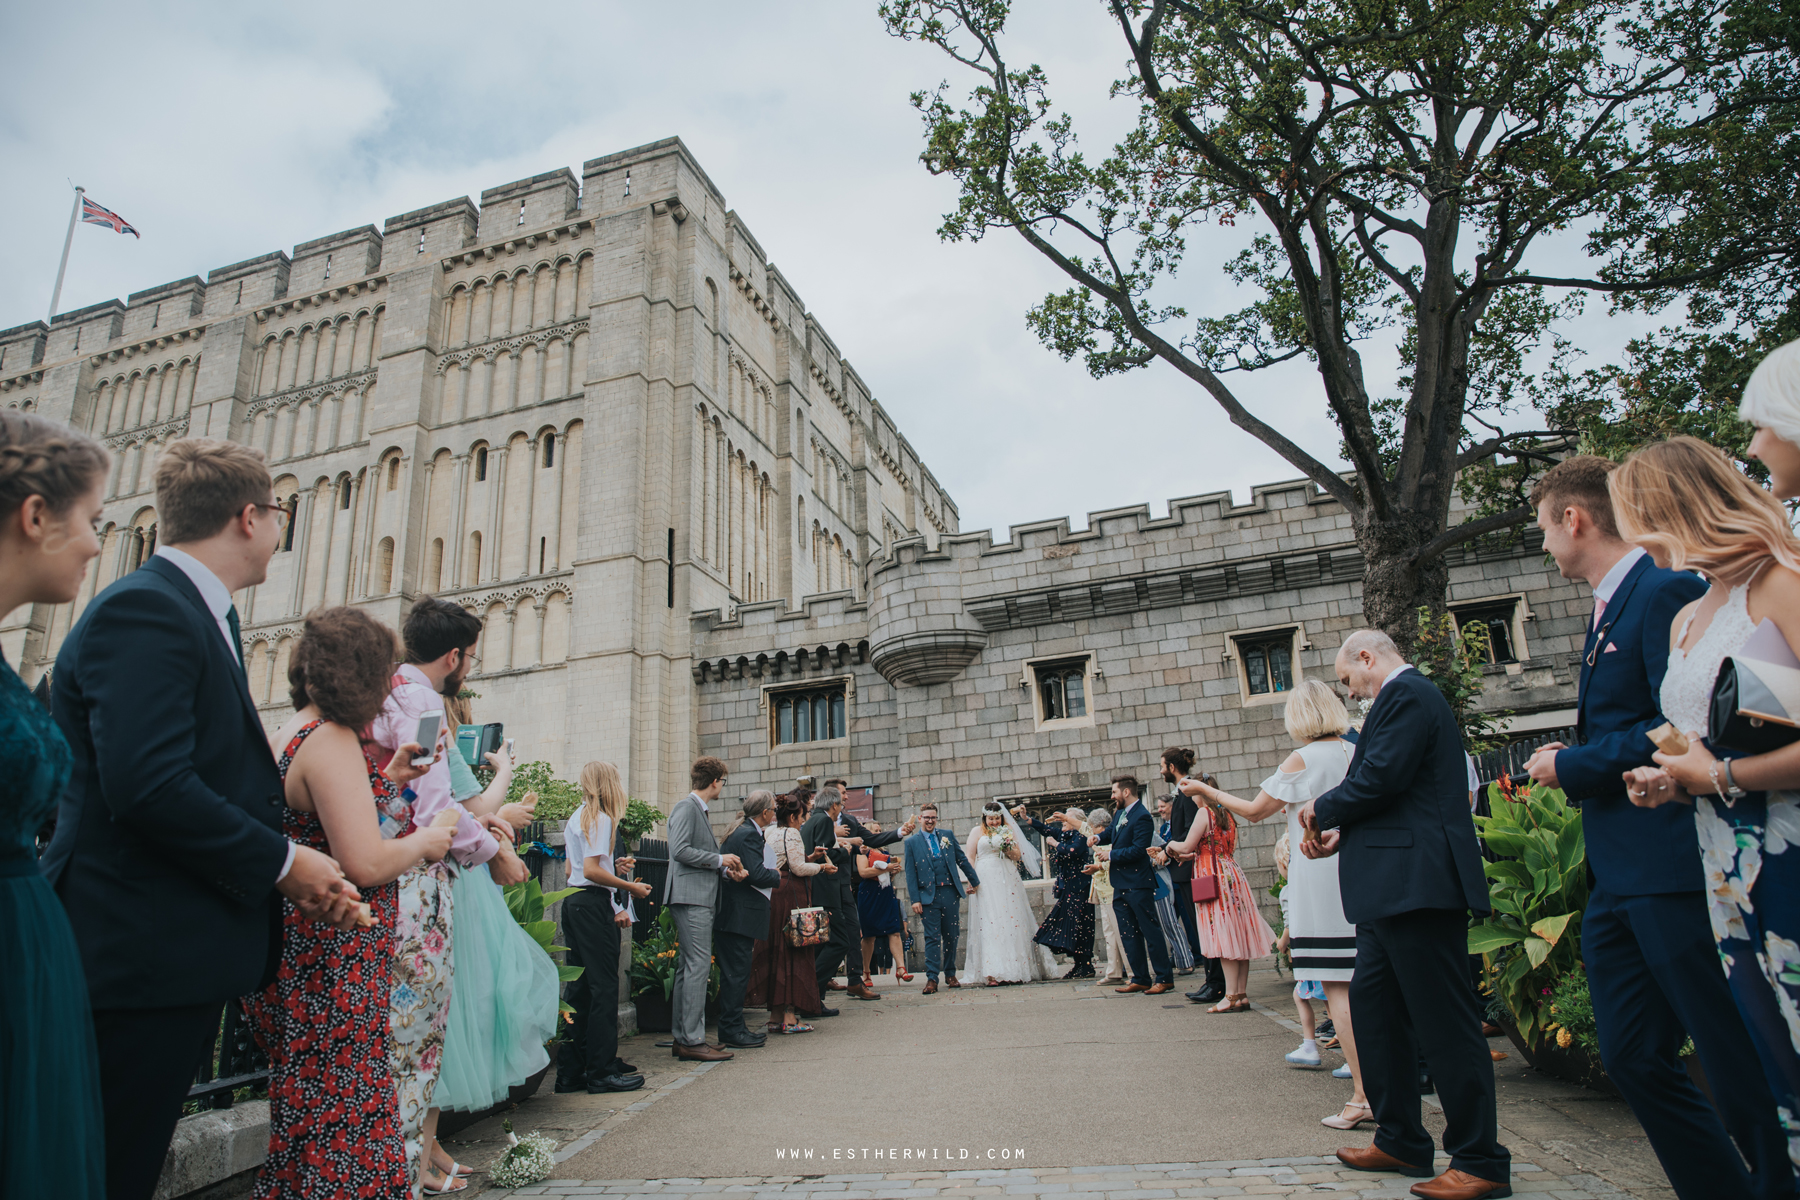 Norwich_Castle_Arcade_Grosvenor_Chip_Birdcage_Cathedral_Cloisters_Refectory_Wedding_Photography_Esther_Wild_Photographer_Norfolk_Kings_Lynn_3R8A1170.jpg